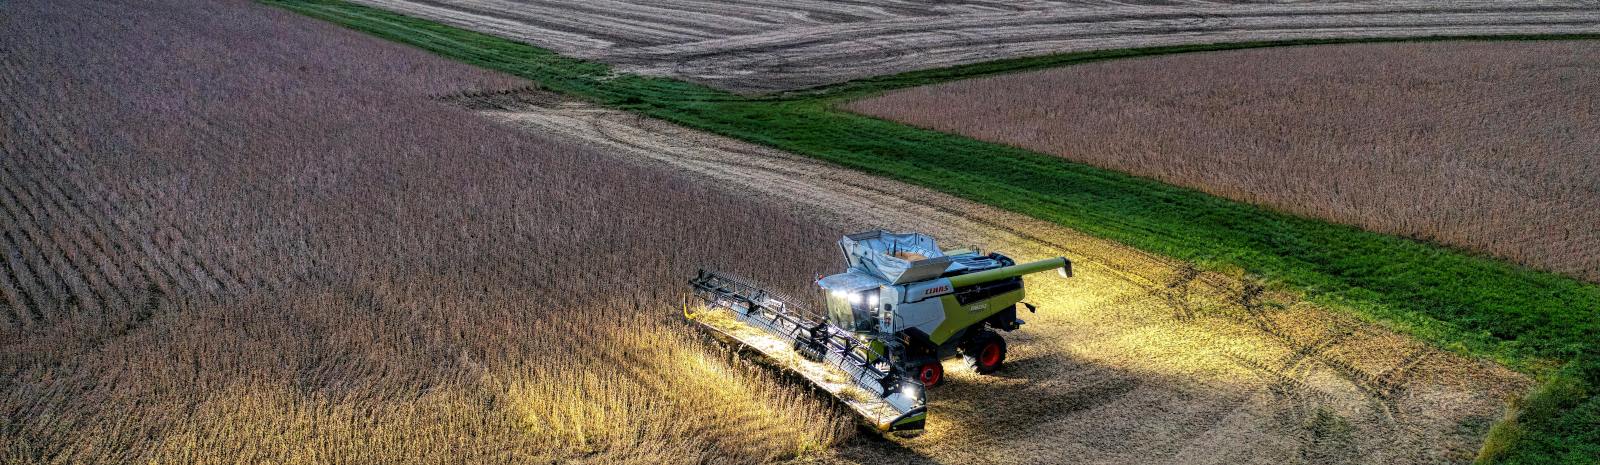 A picture of a tractor being used on a soybean farm.